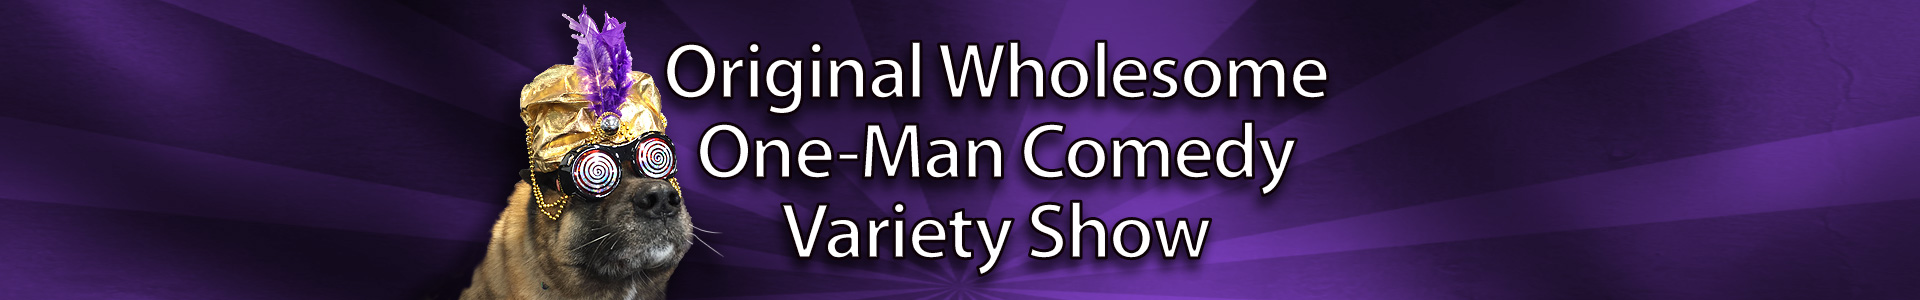 Original Wholesome One-Man Comedy Variety Show